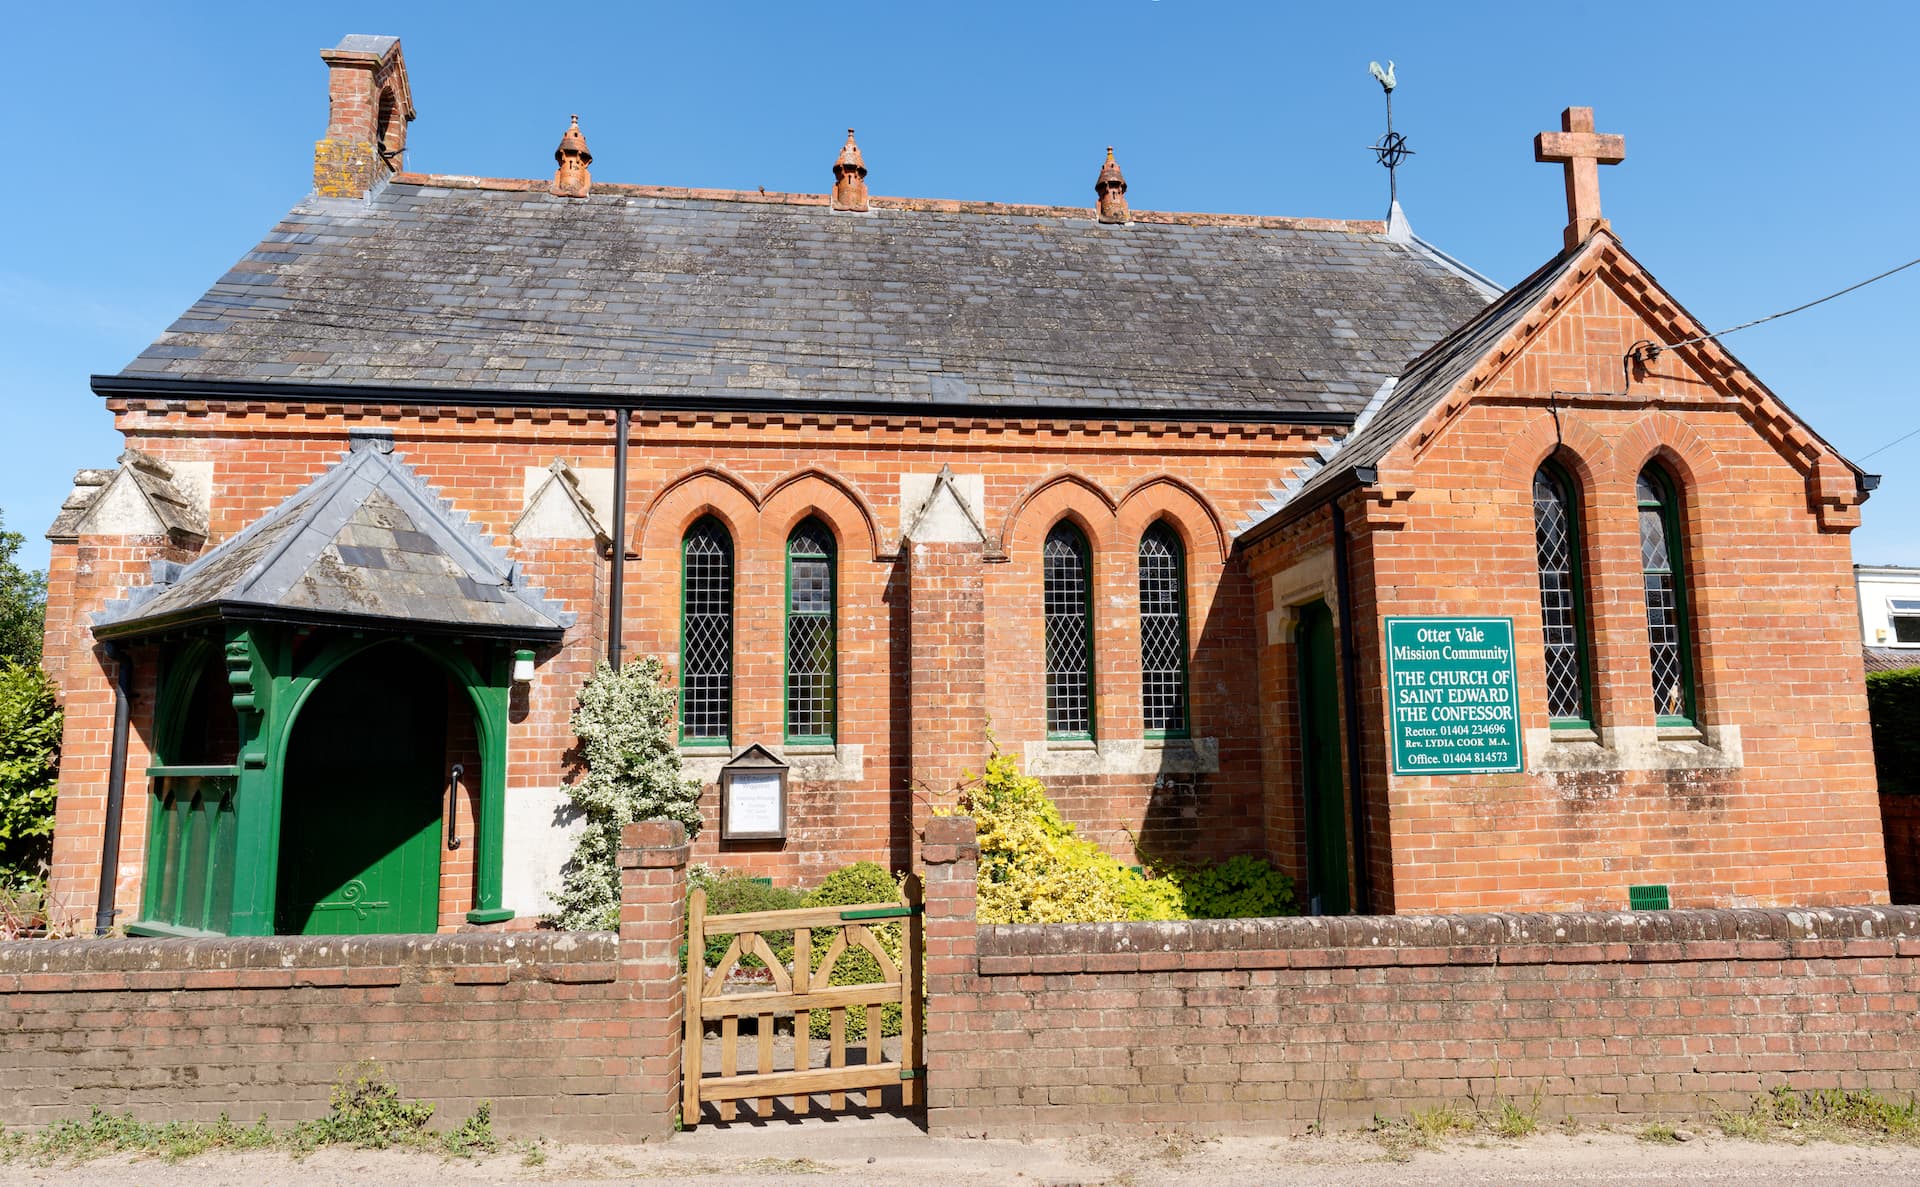 A view of the south-side of Wiggaton church showing the entrance porch and Edwardian brick design